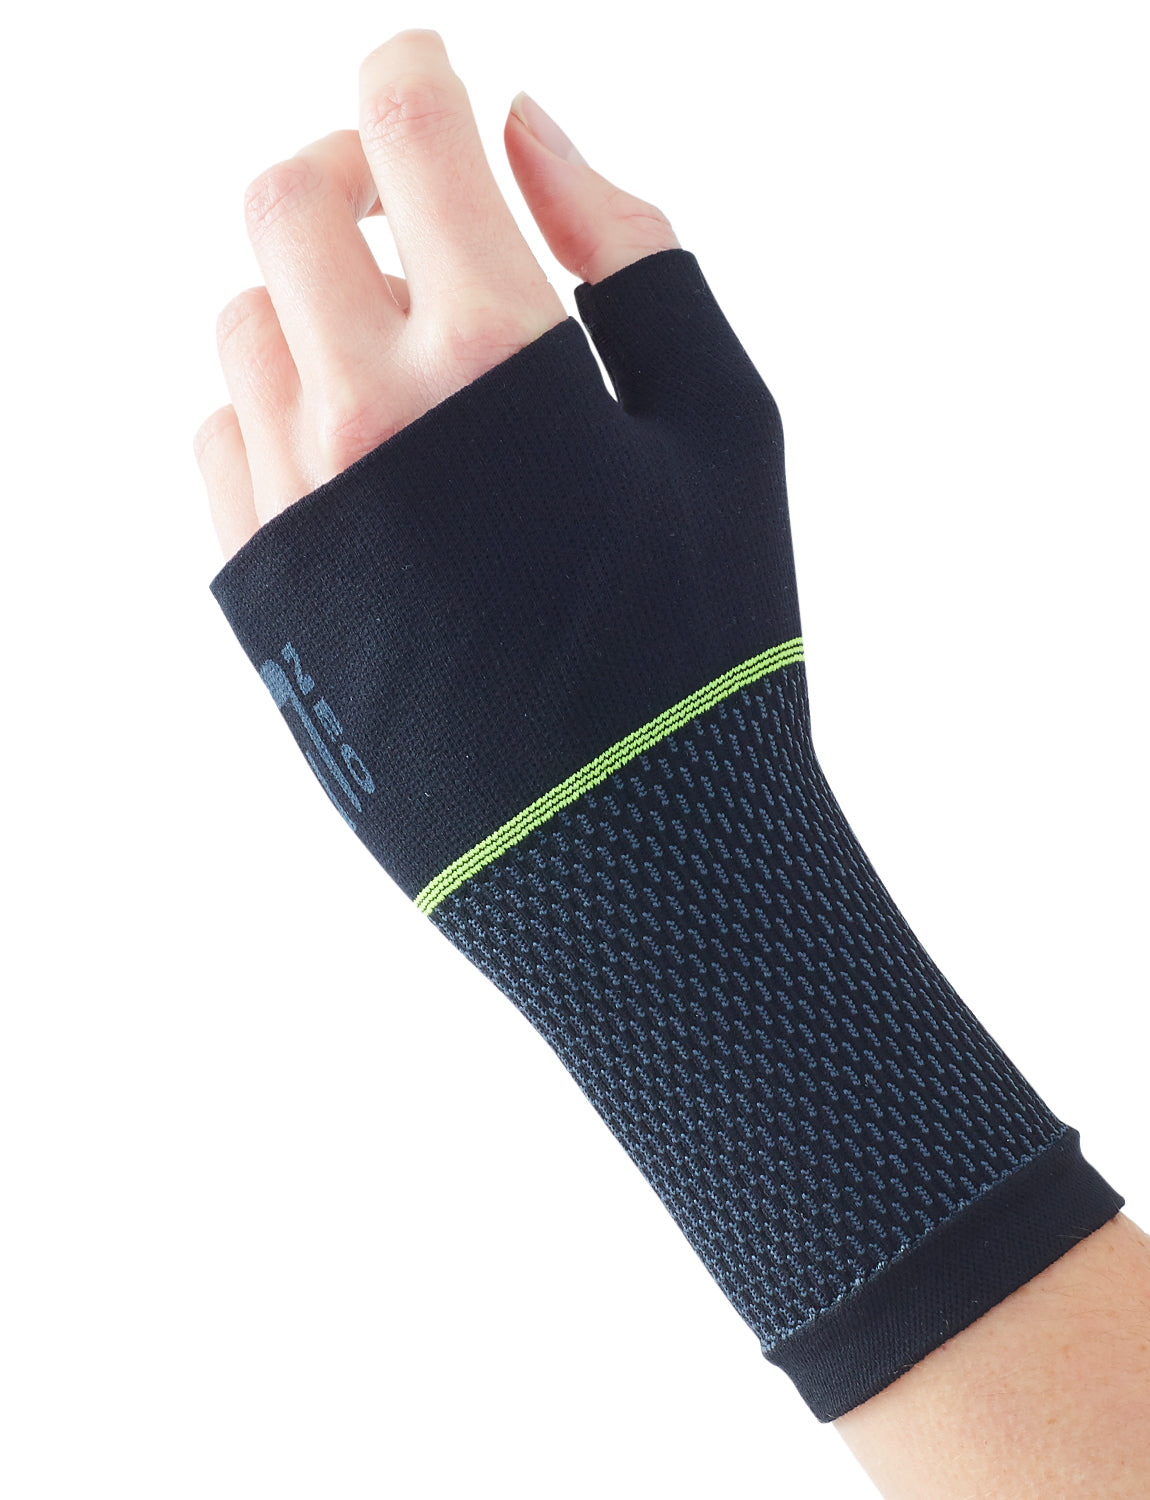 Neo G Active Wrist Support – Neo G USA